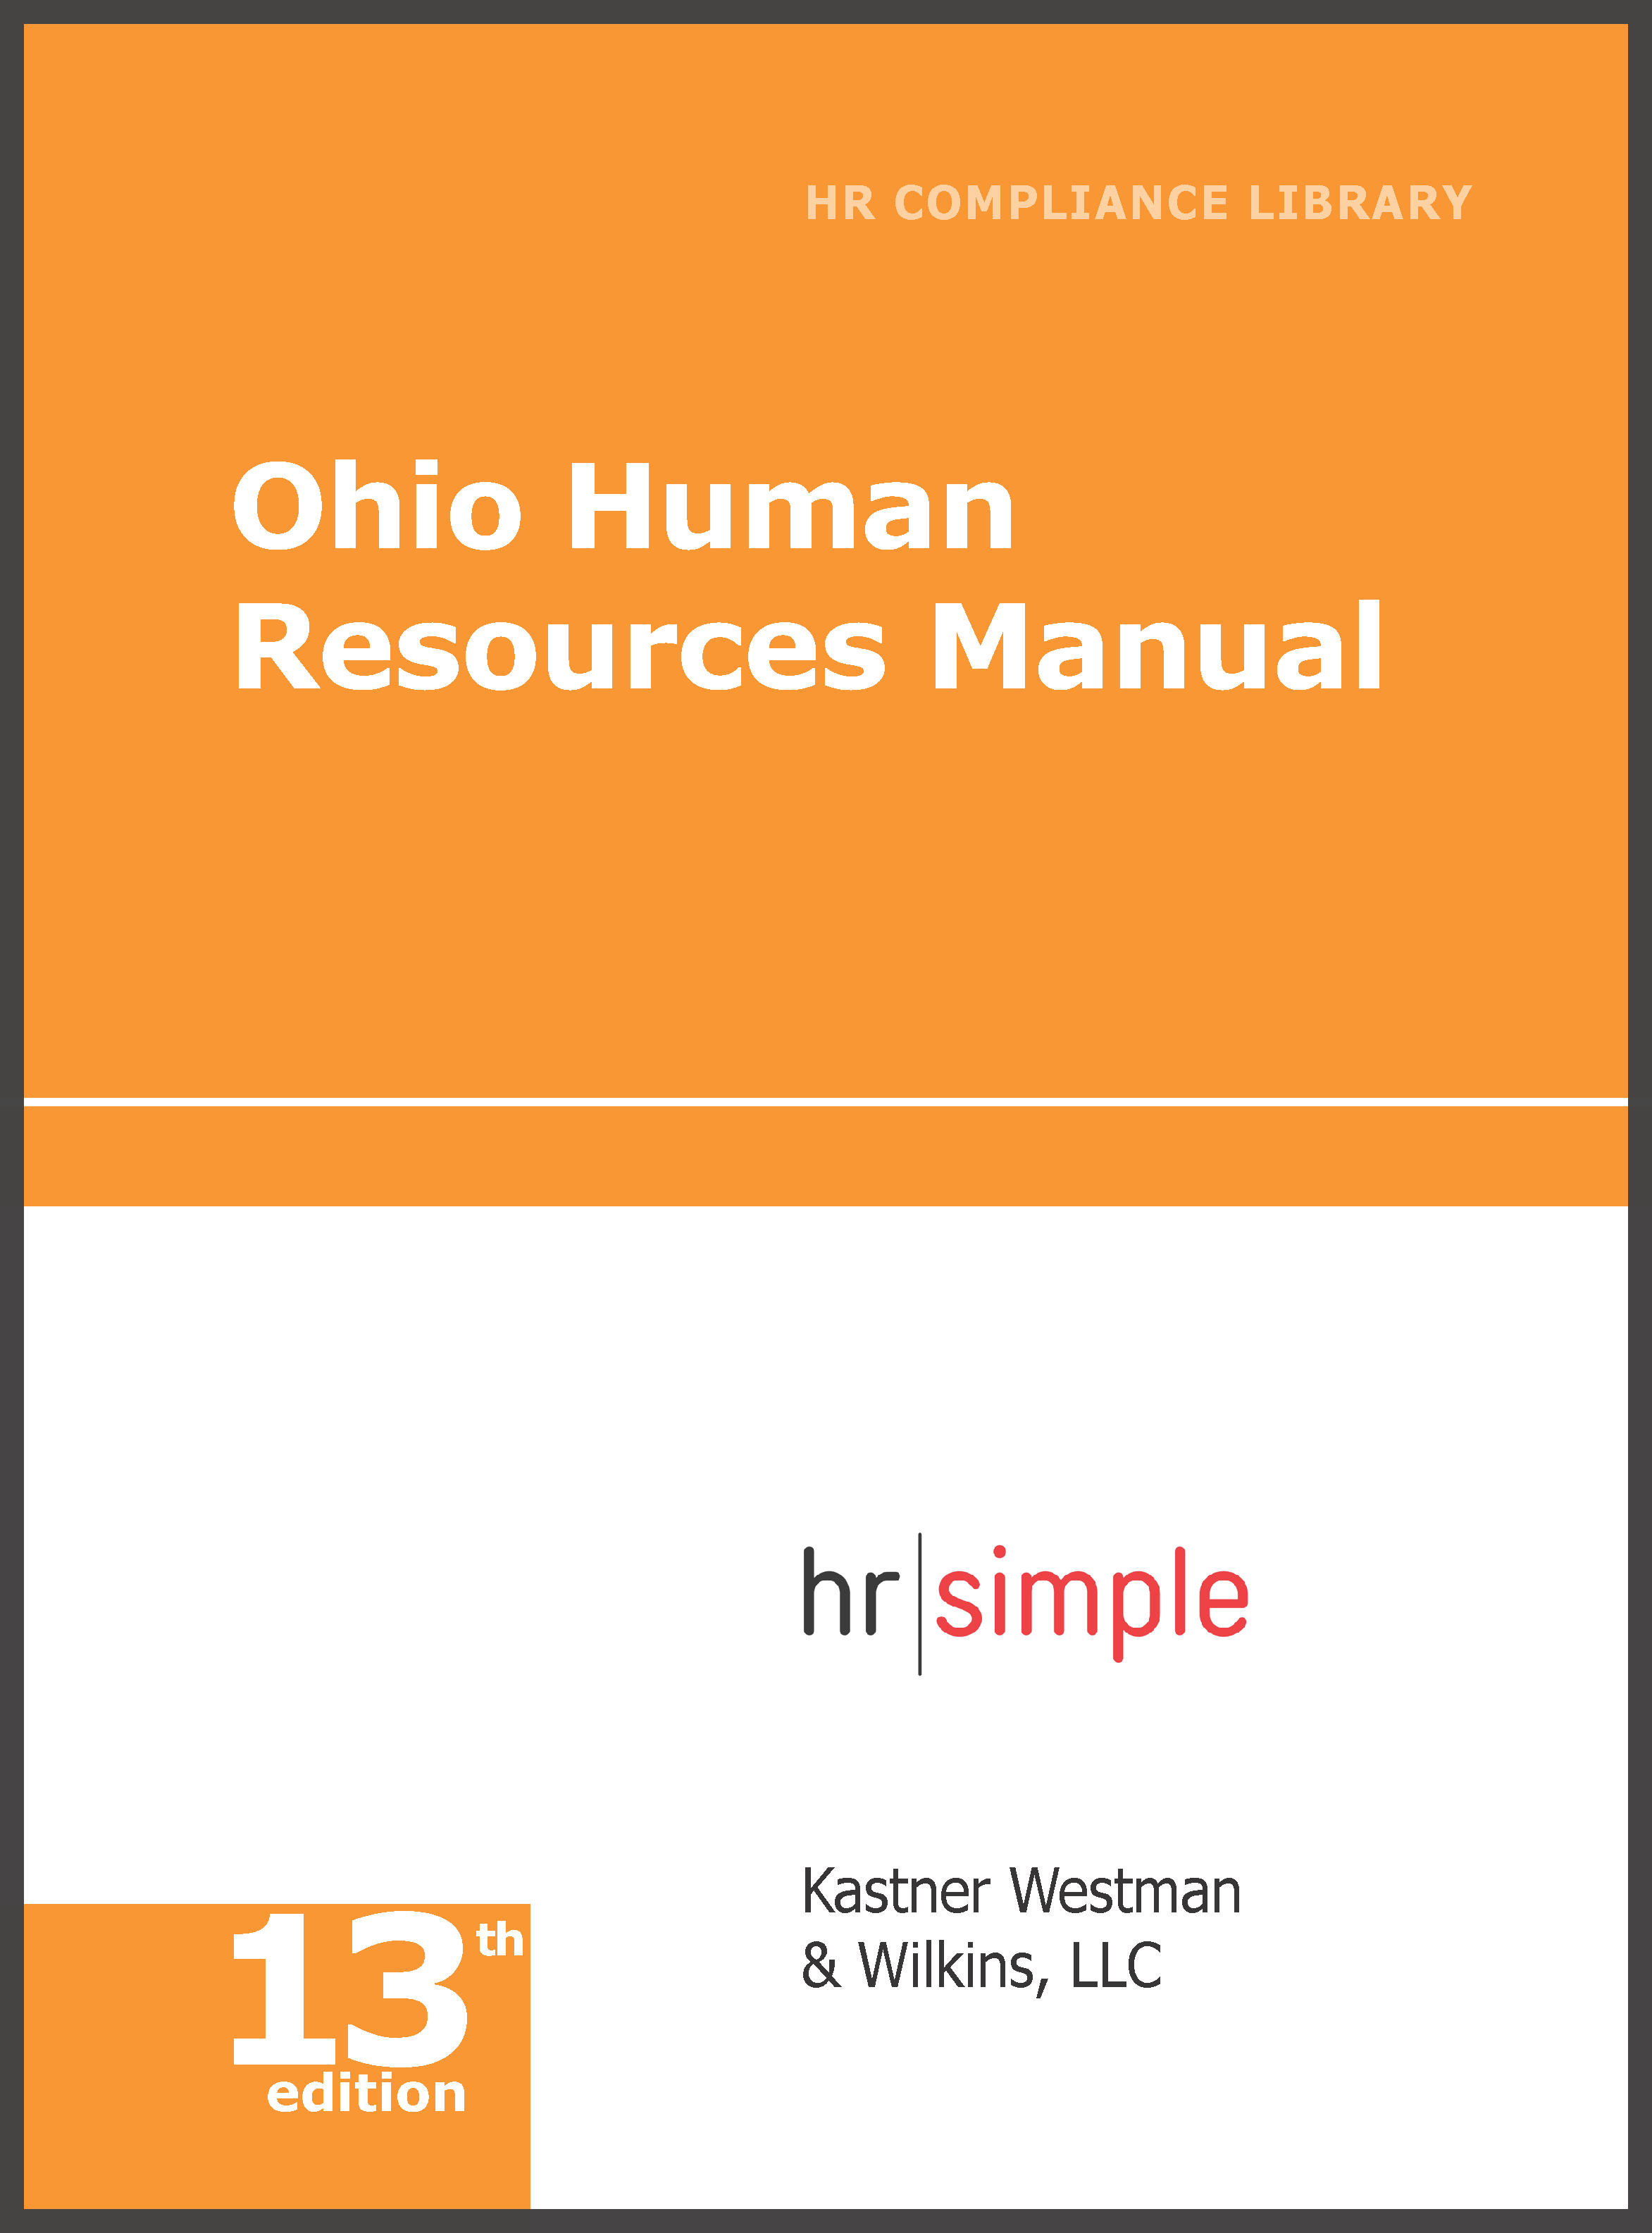 Ohio Human Resources Library  employment law image, remote work, labor laws, employment laws, right to work, order of protection, minimum wage